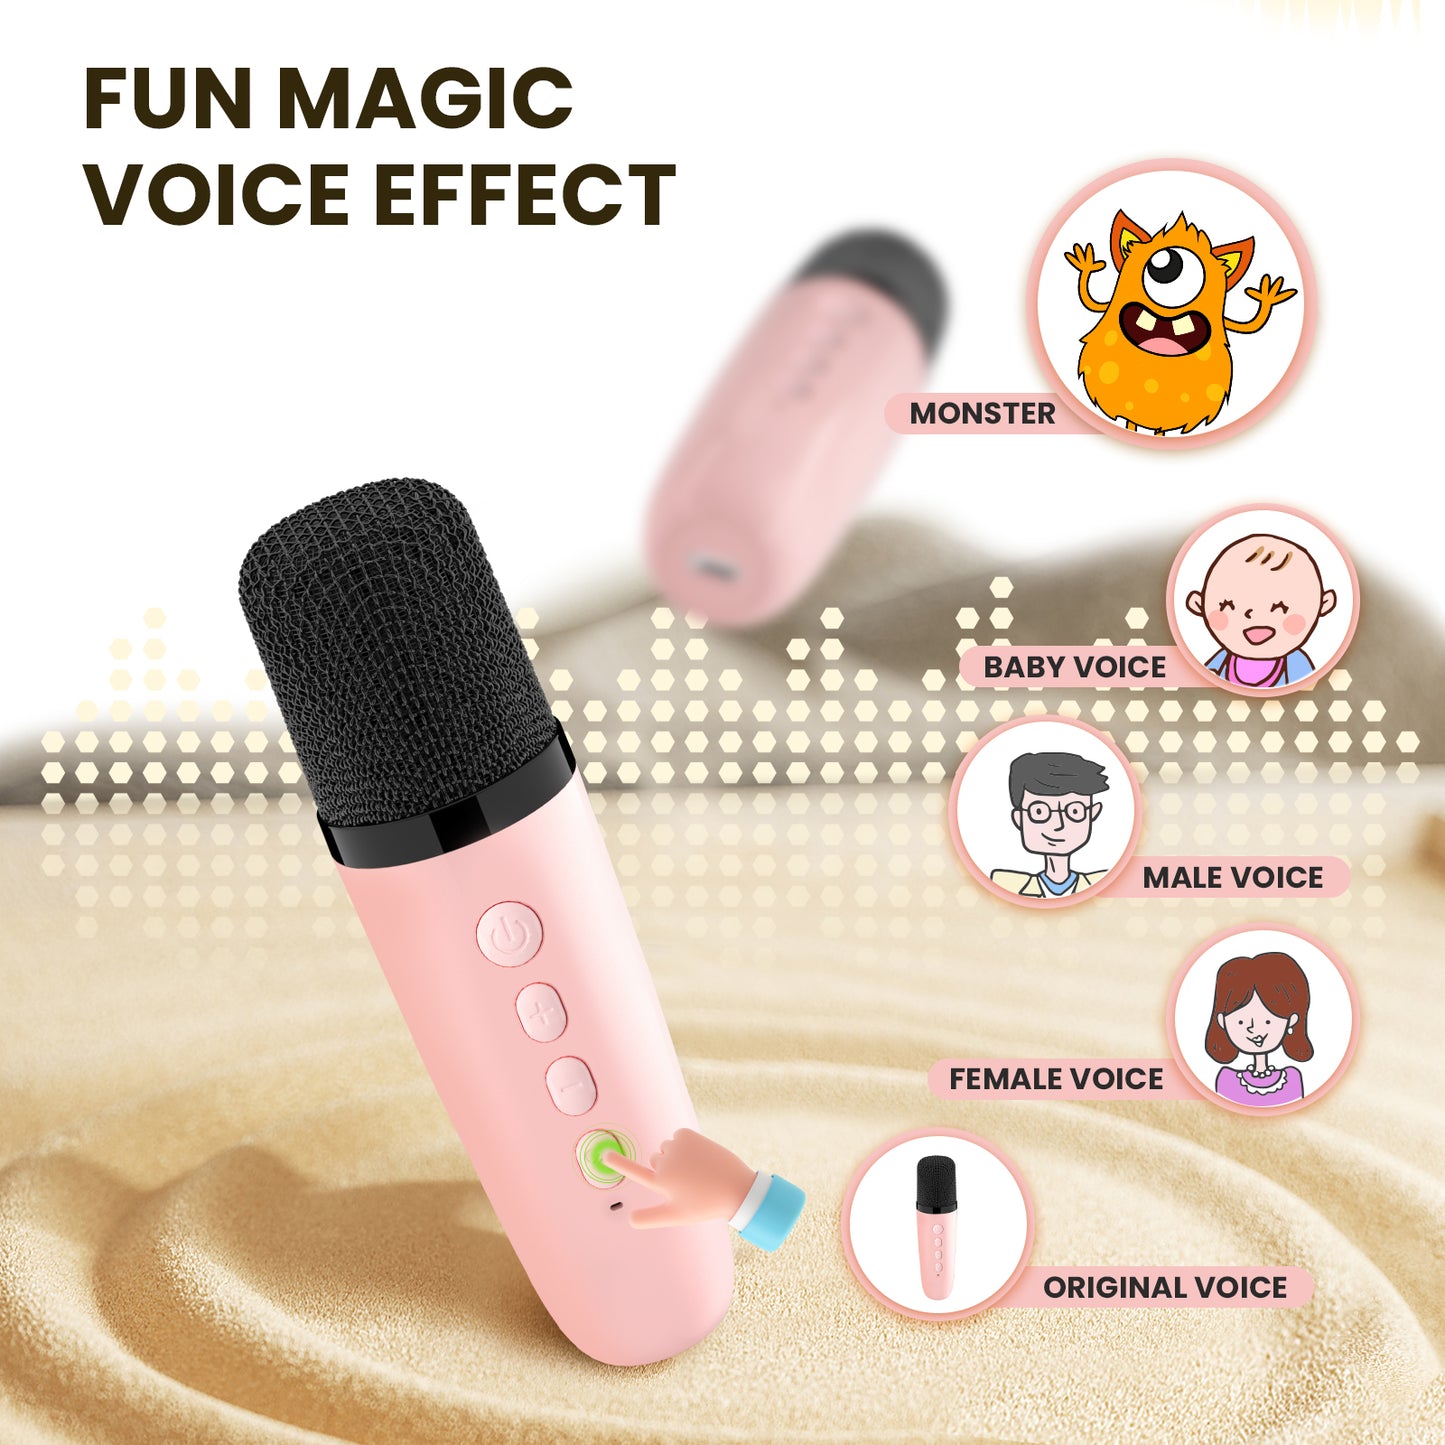 Kids Karaoke Machine Toy Set,BONAOK Portable Mini Bluetooth Speaker with Wireless Microphone Christmas Girls Boys Birthday Gifts for Years Old 4, 5, 6, 7+ Tablets & Accessories 1MIC P-ink